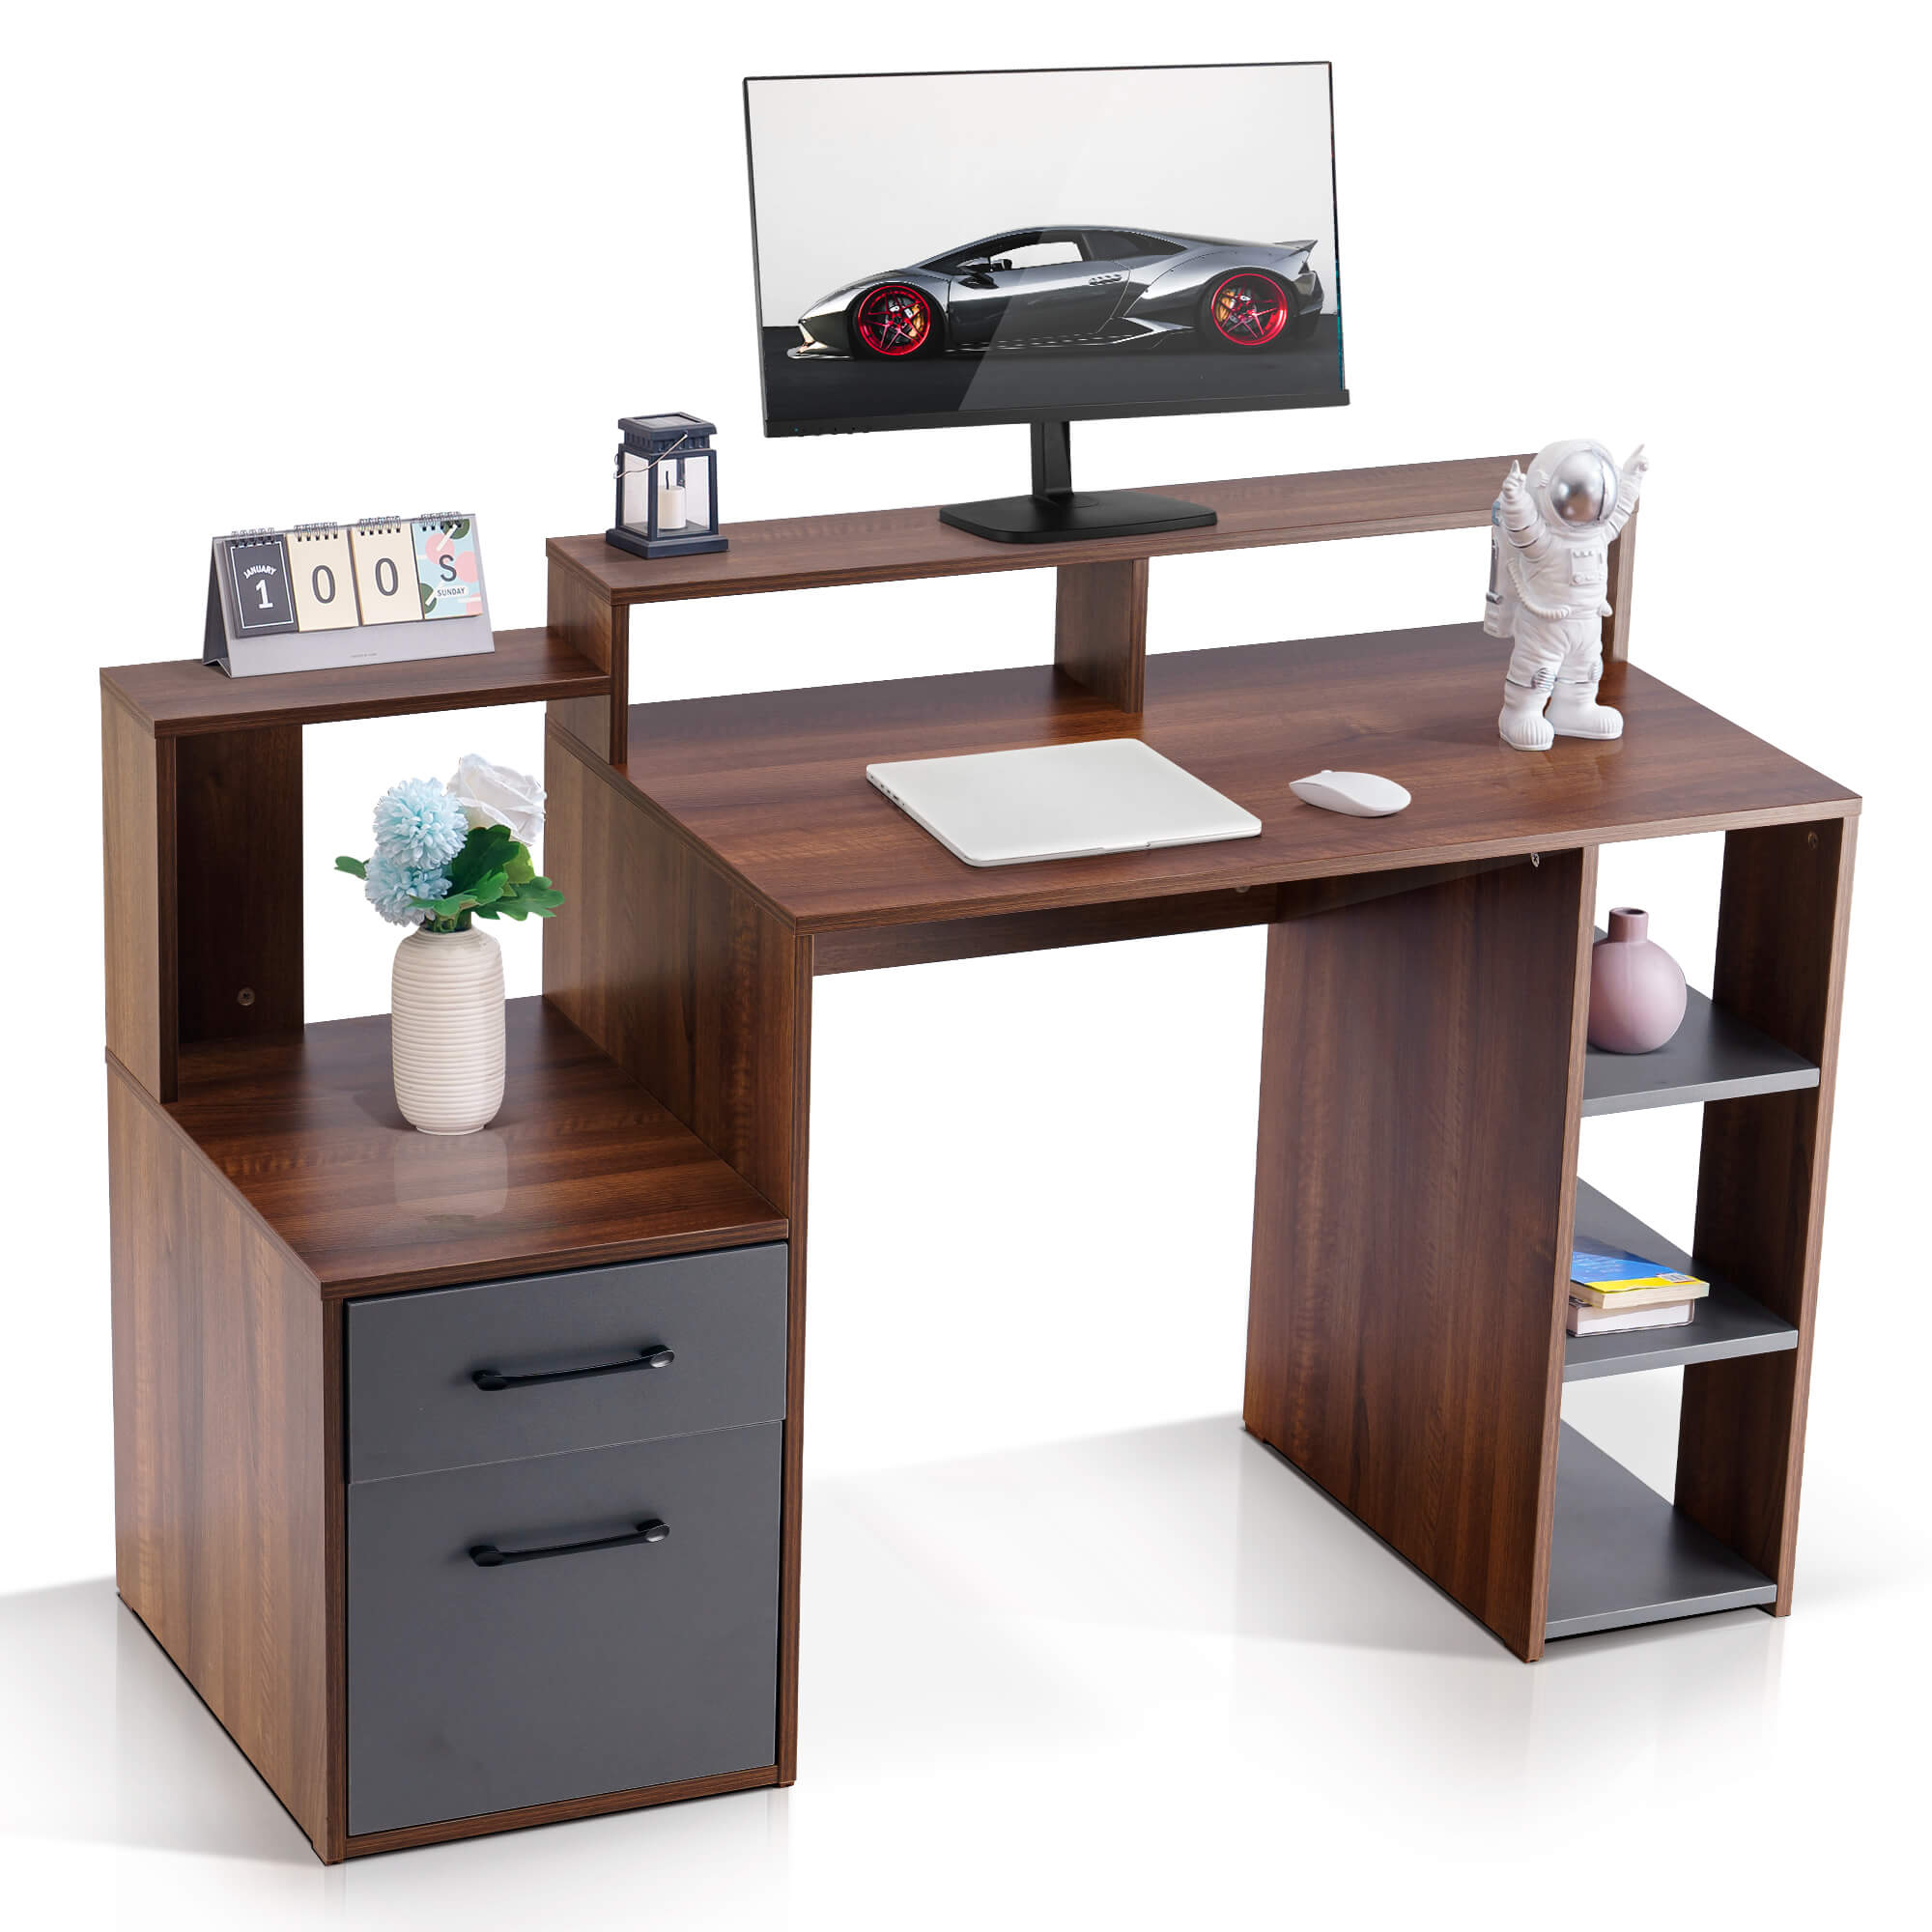 Ivinta Computer Desk with Shelves White Desk Office Desk with CPU Stand Vanity Desk with Storage Modern Gaming Desk Study Writing Laptop Table